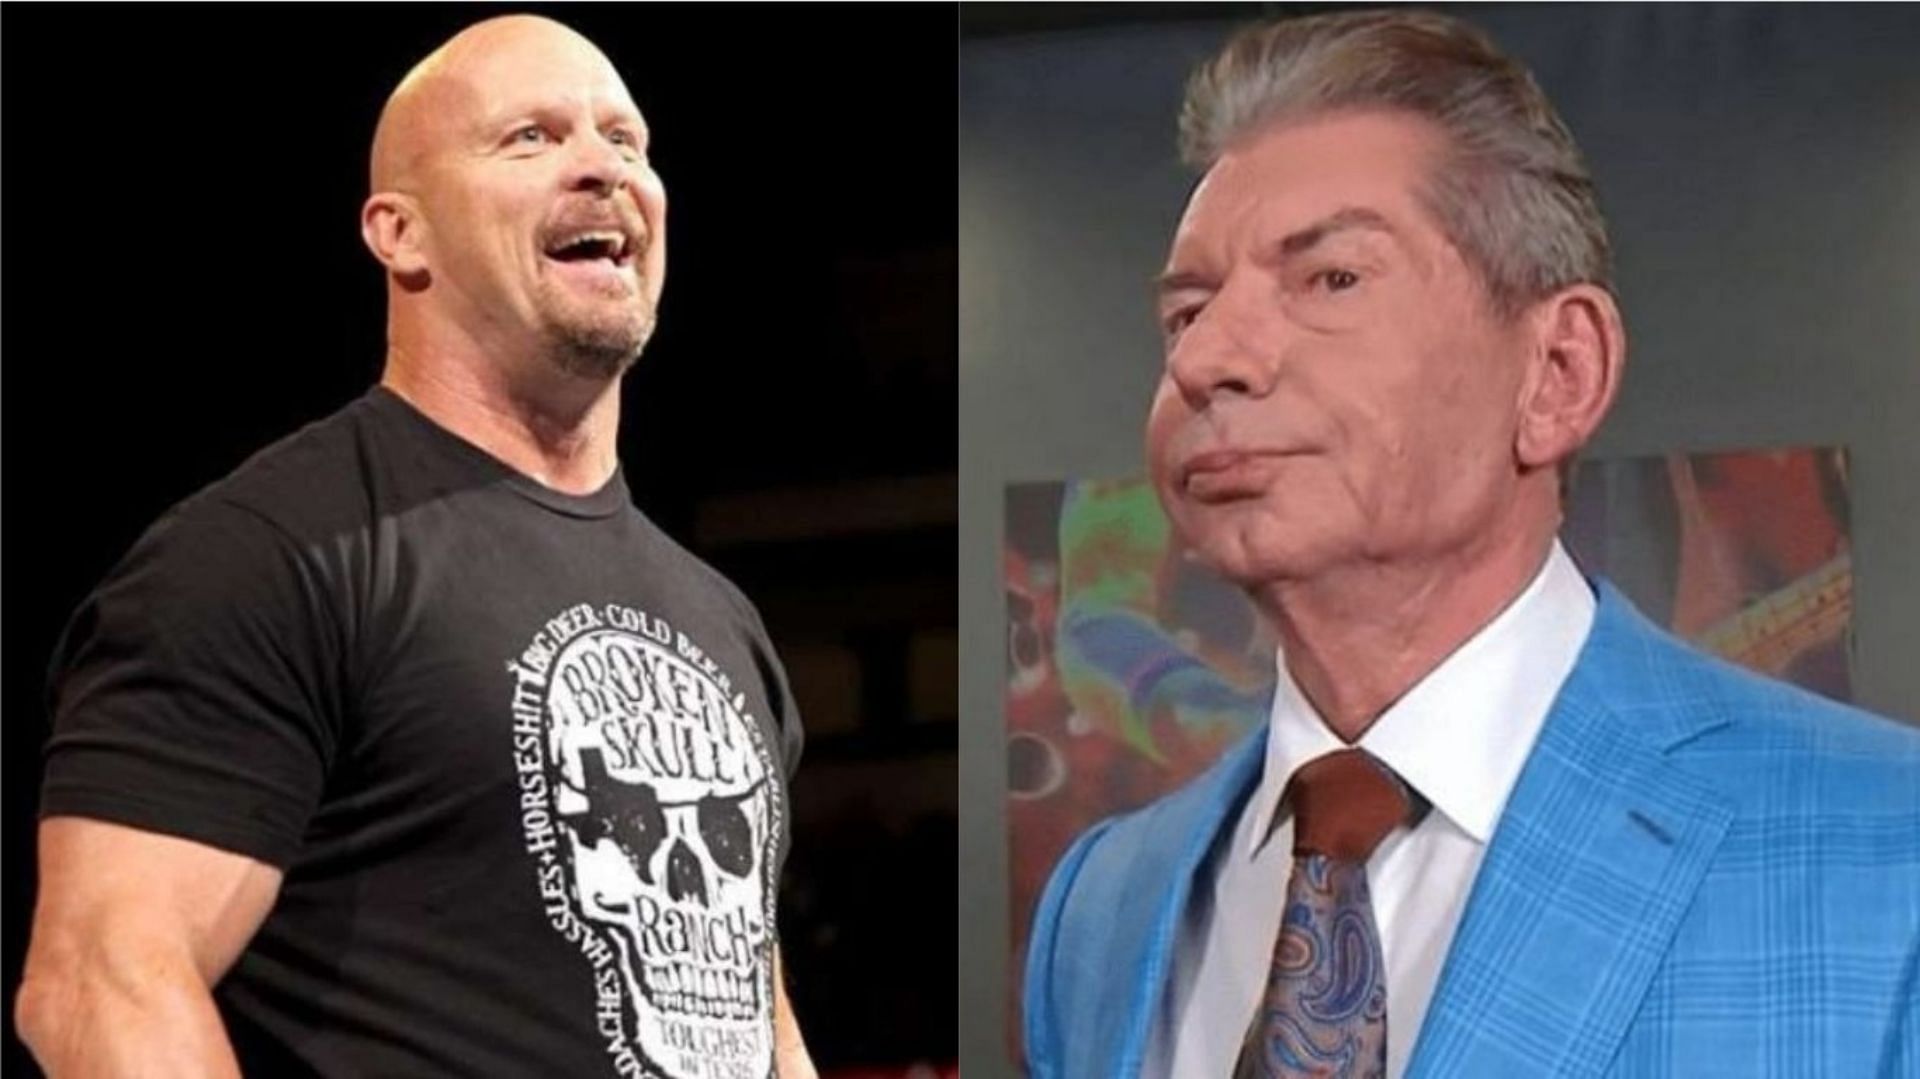 The Texas Rattlesnake (left) and Mr. McMahon (right)